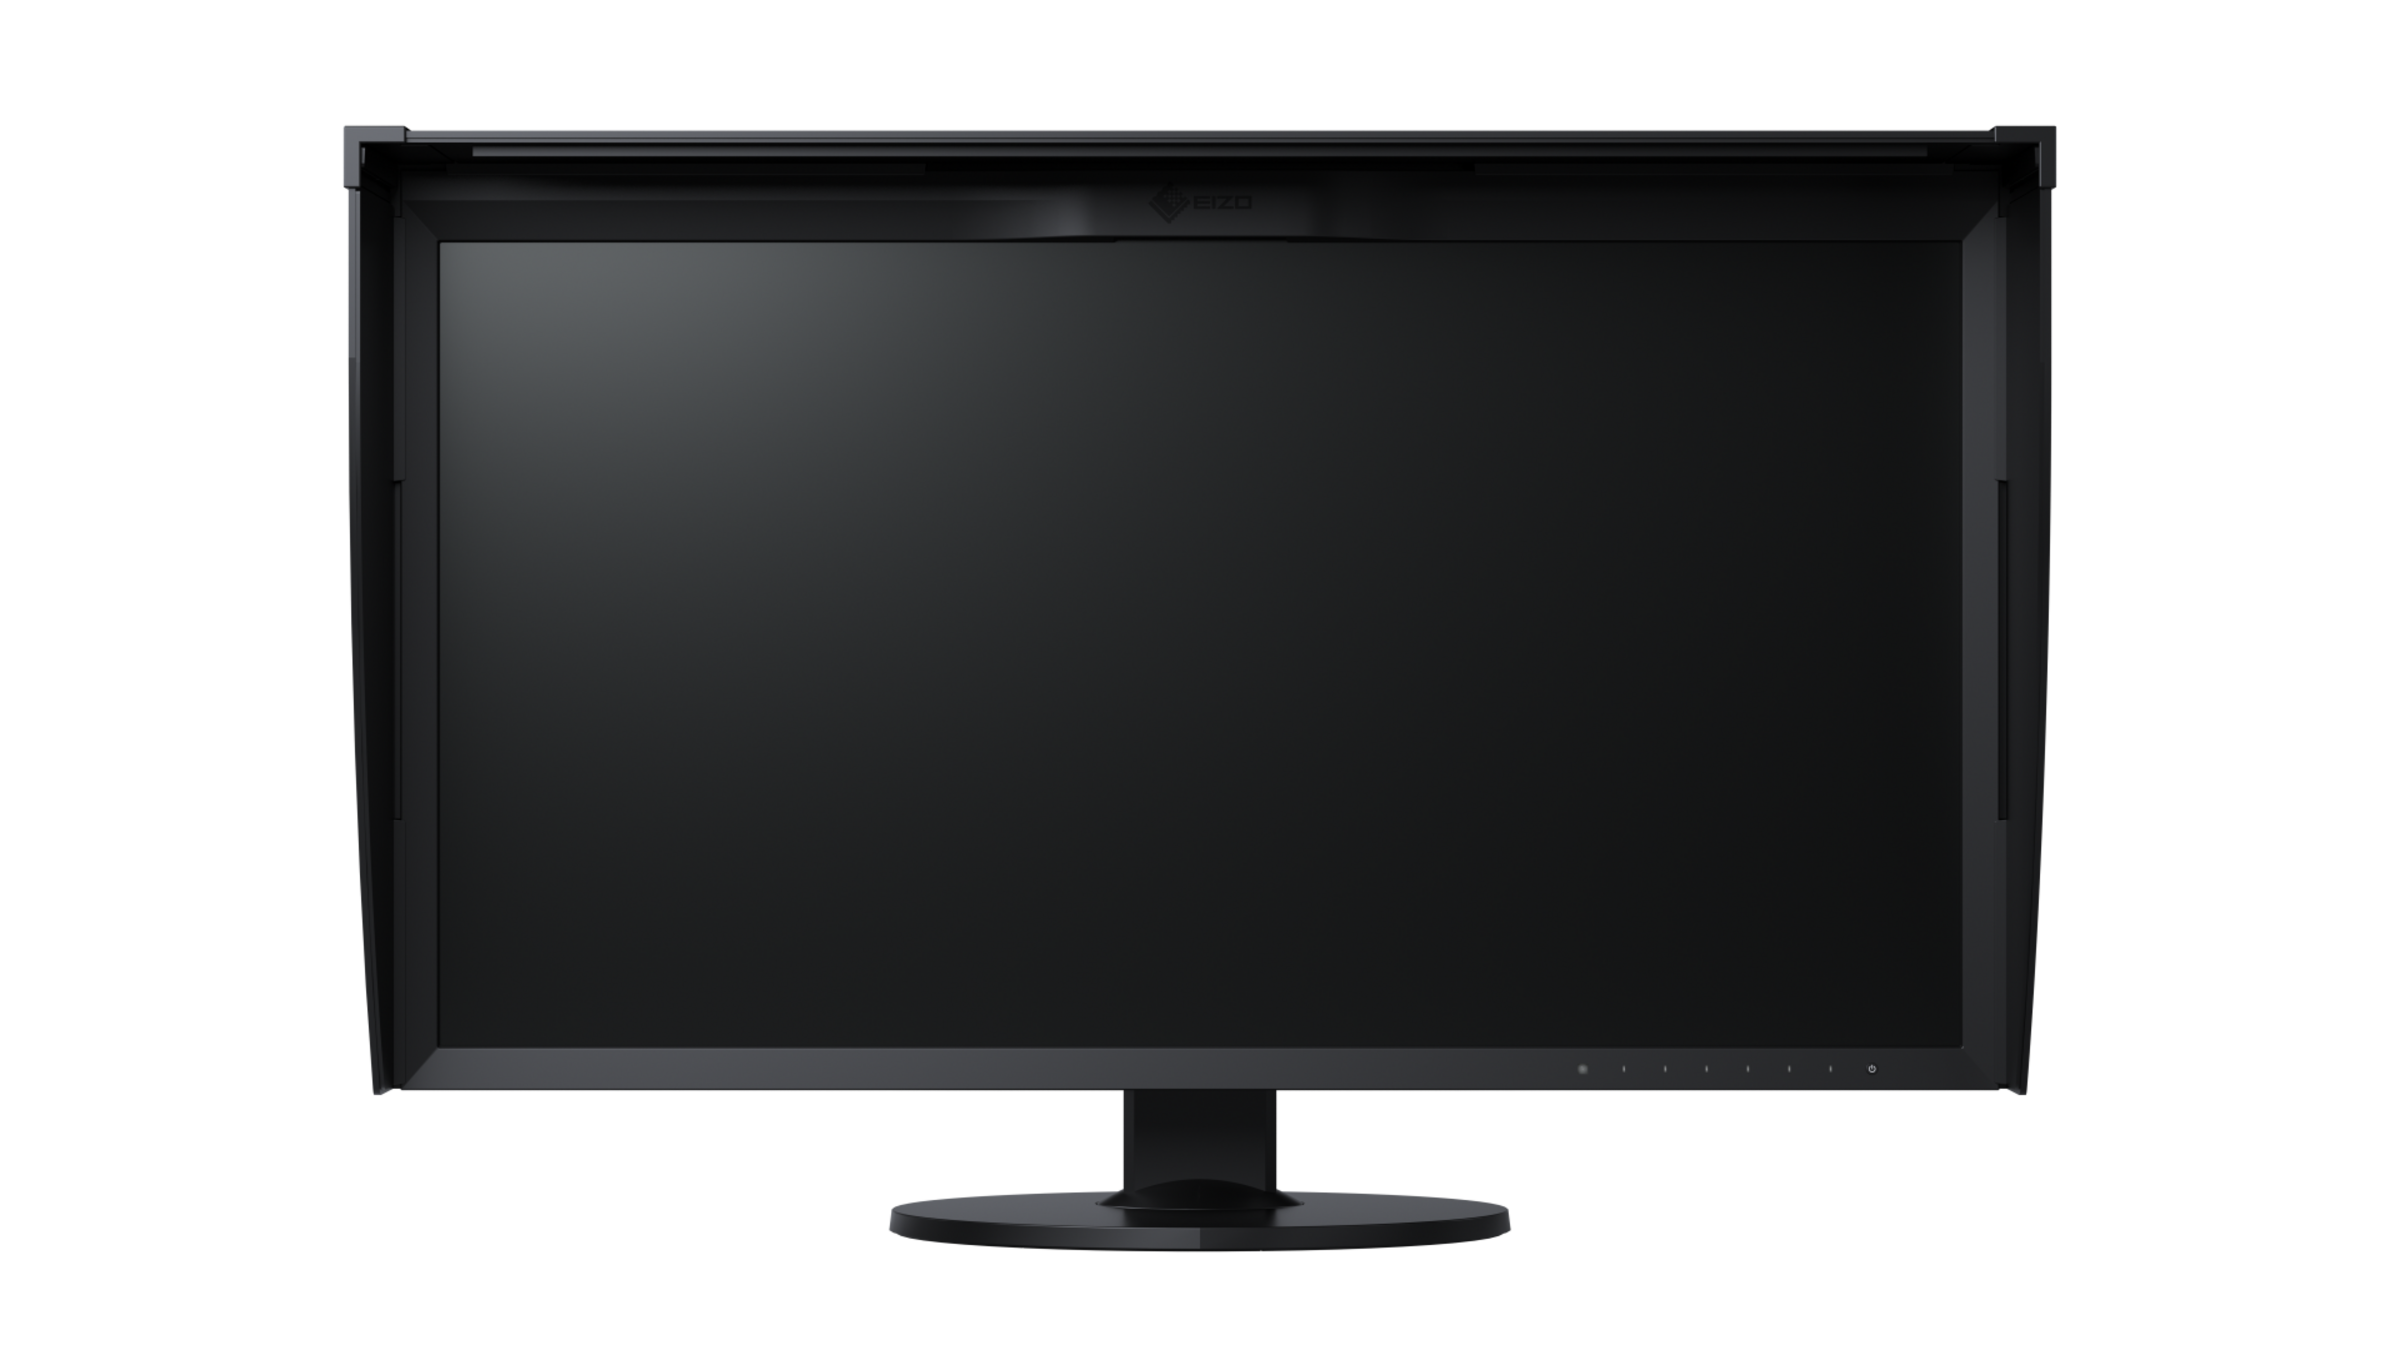 ColorEdge CG319X | 31-inch monitor with 4K DCI resolution